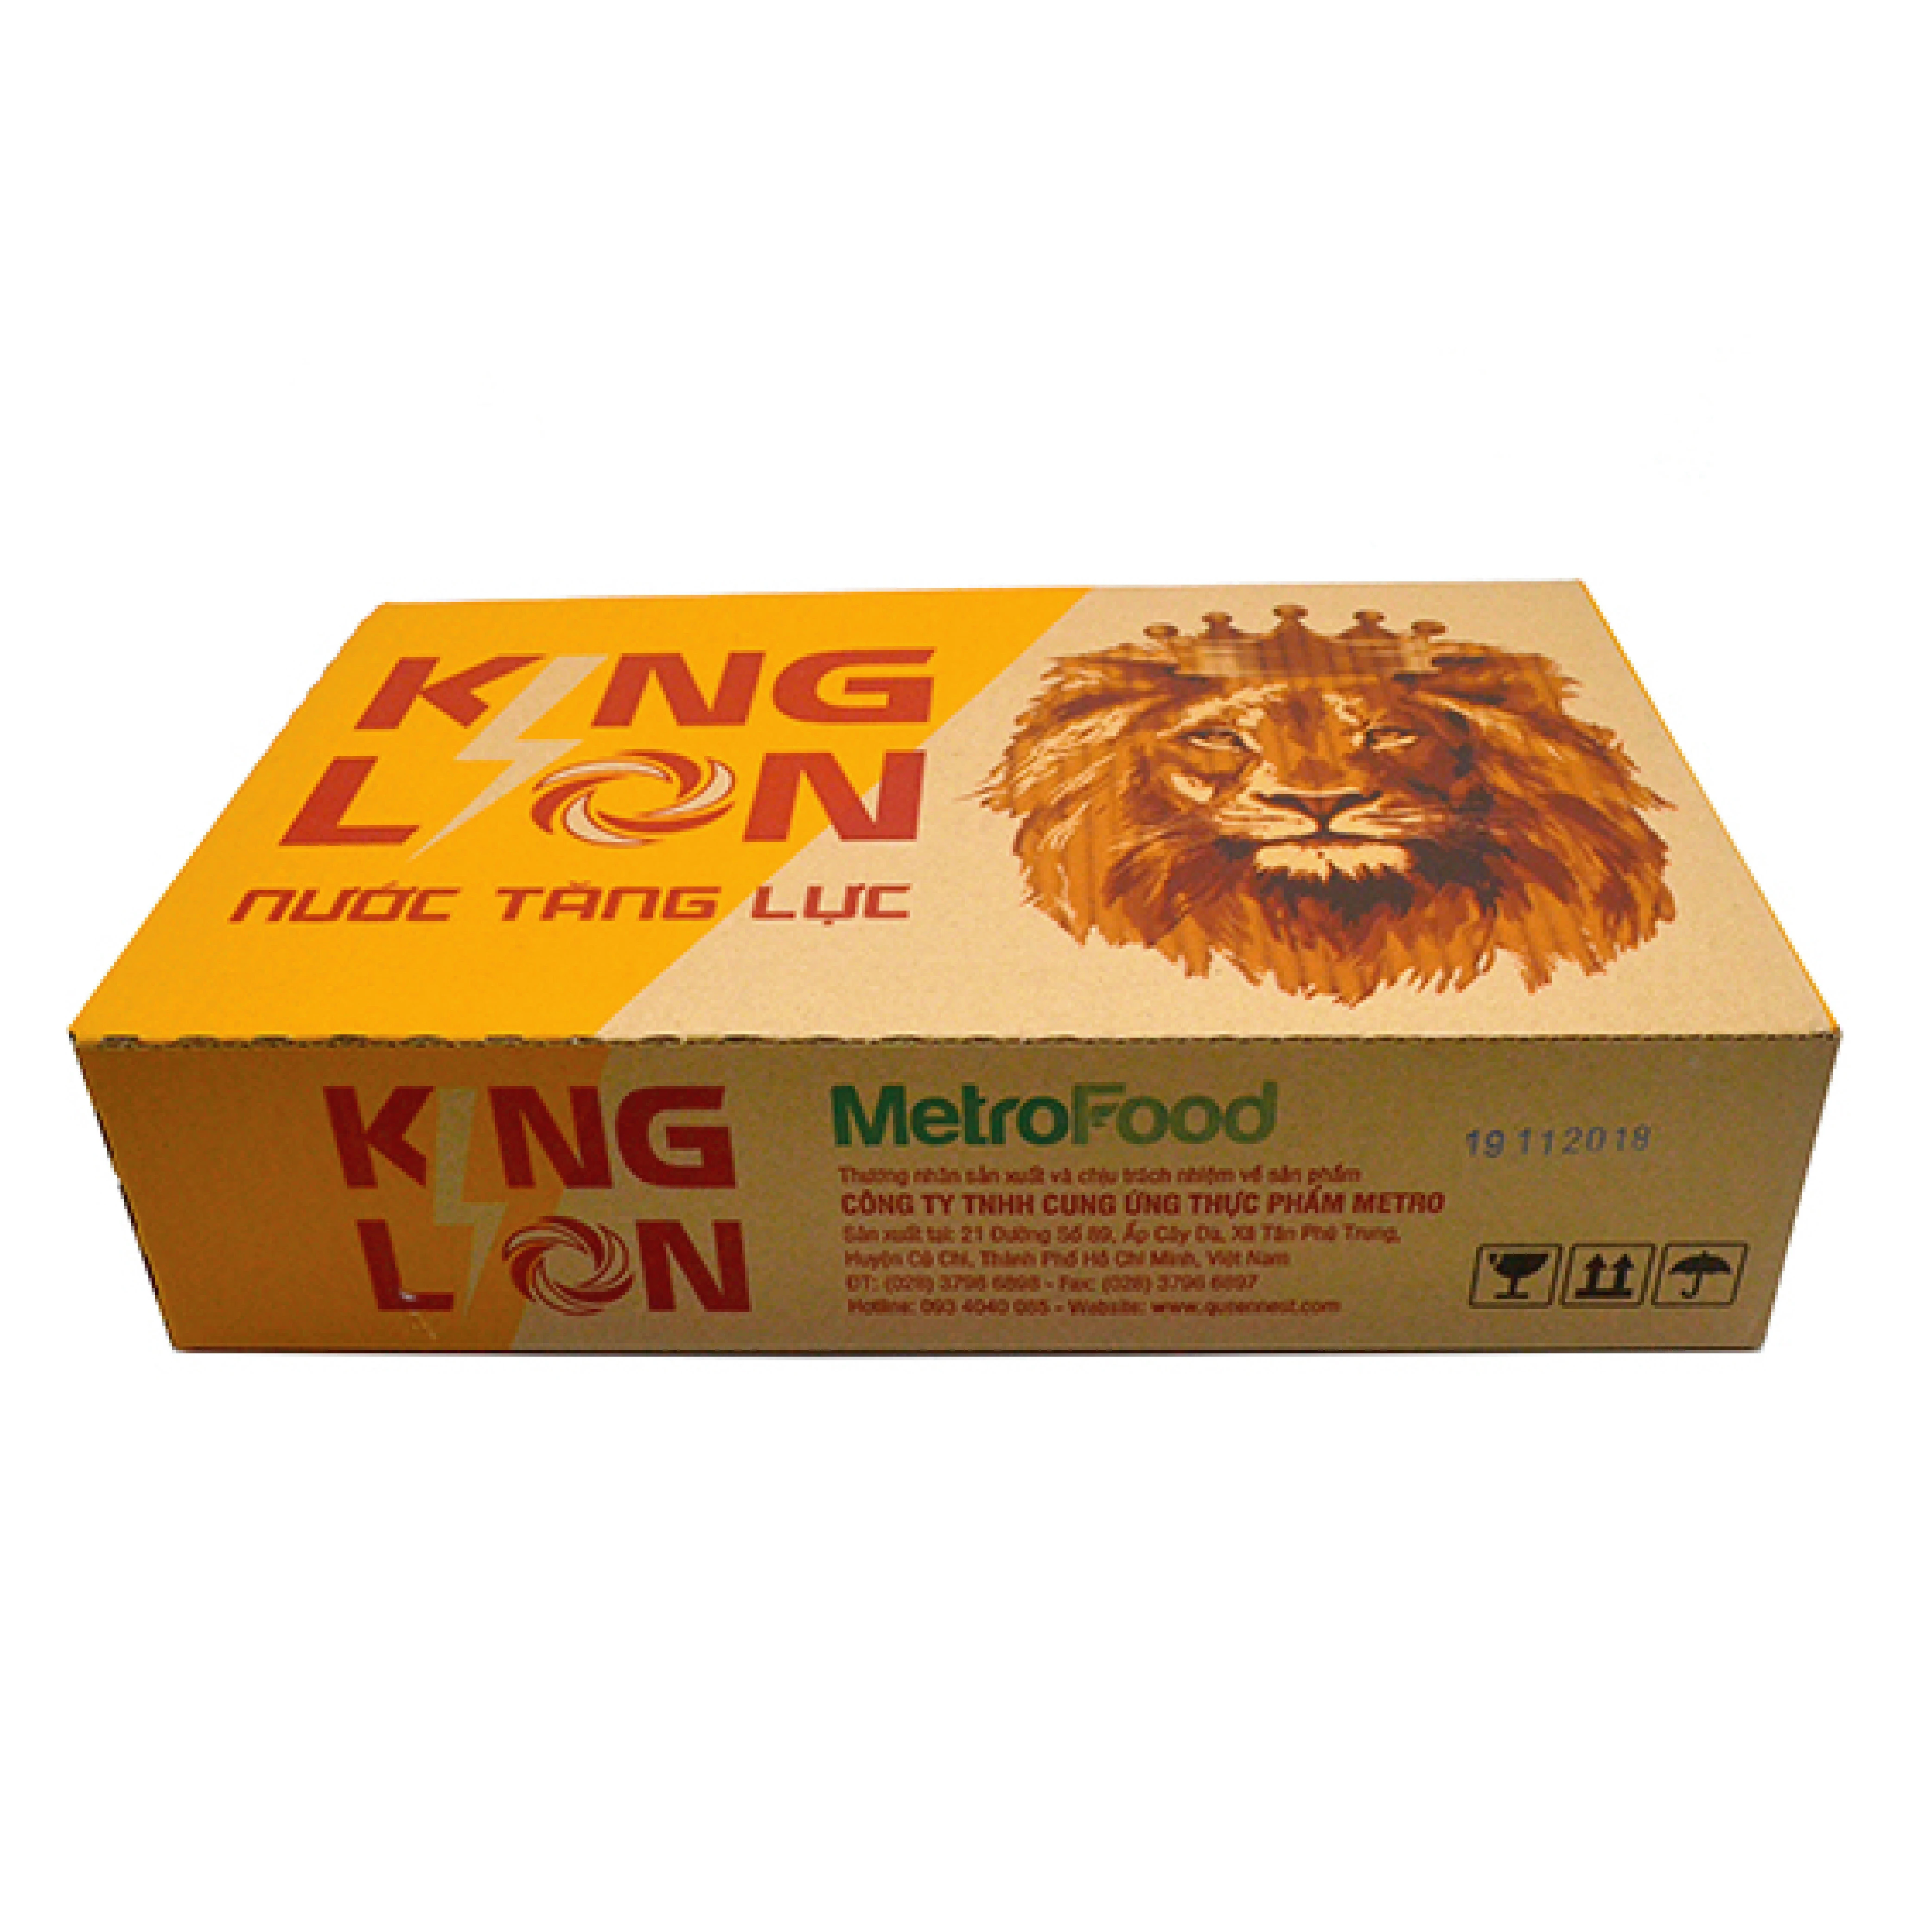 KING LION Non-Carbonated Energy Drink (24 Cans x 250ml) from Vietnam